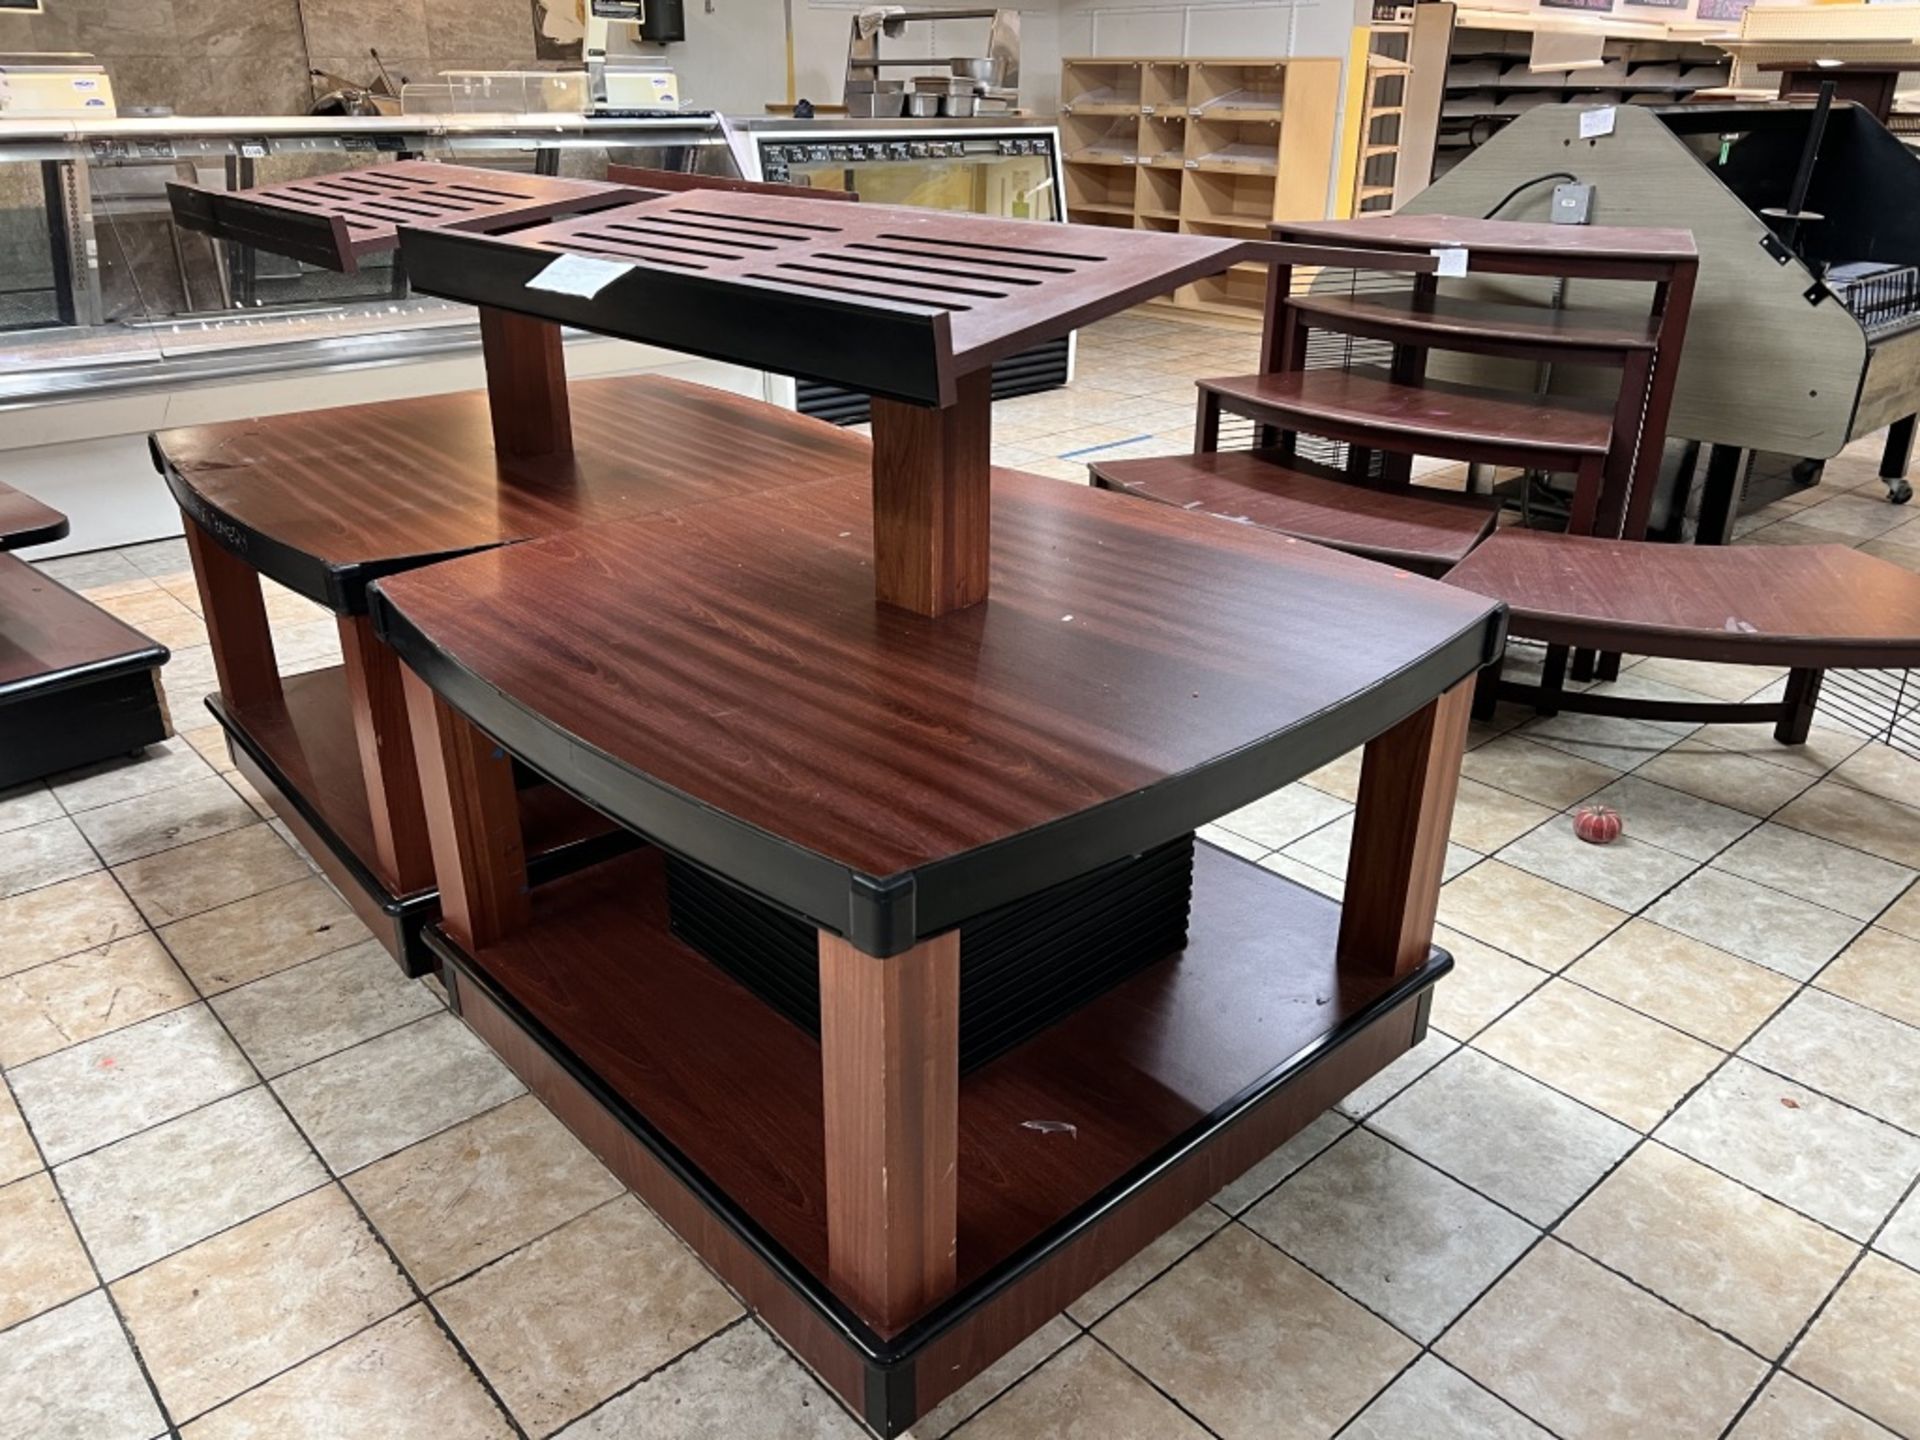 Lot of: (2) approximately 47” X 47” 2 tier wood laminate display tables w/ upper display shelving - Image 4 of 18